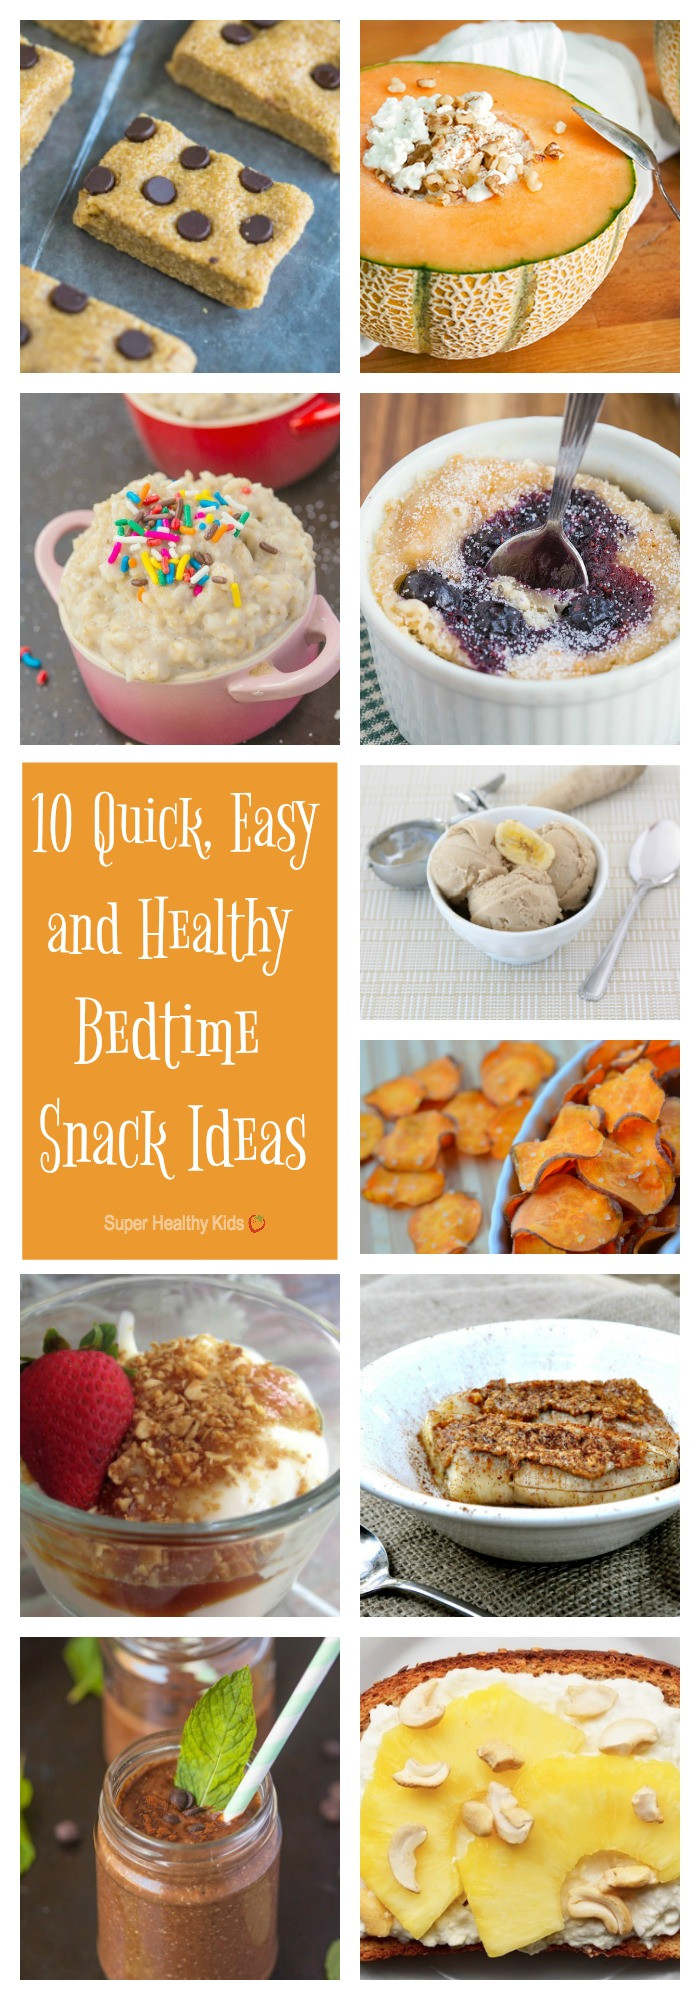 Quick And Healthy Snacks
 10 Quick Easy and Healthy Bedtime Snack Ideas